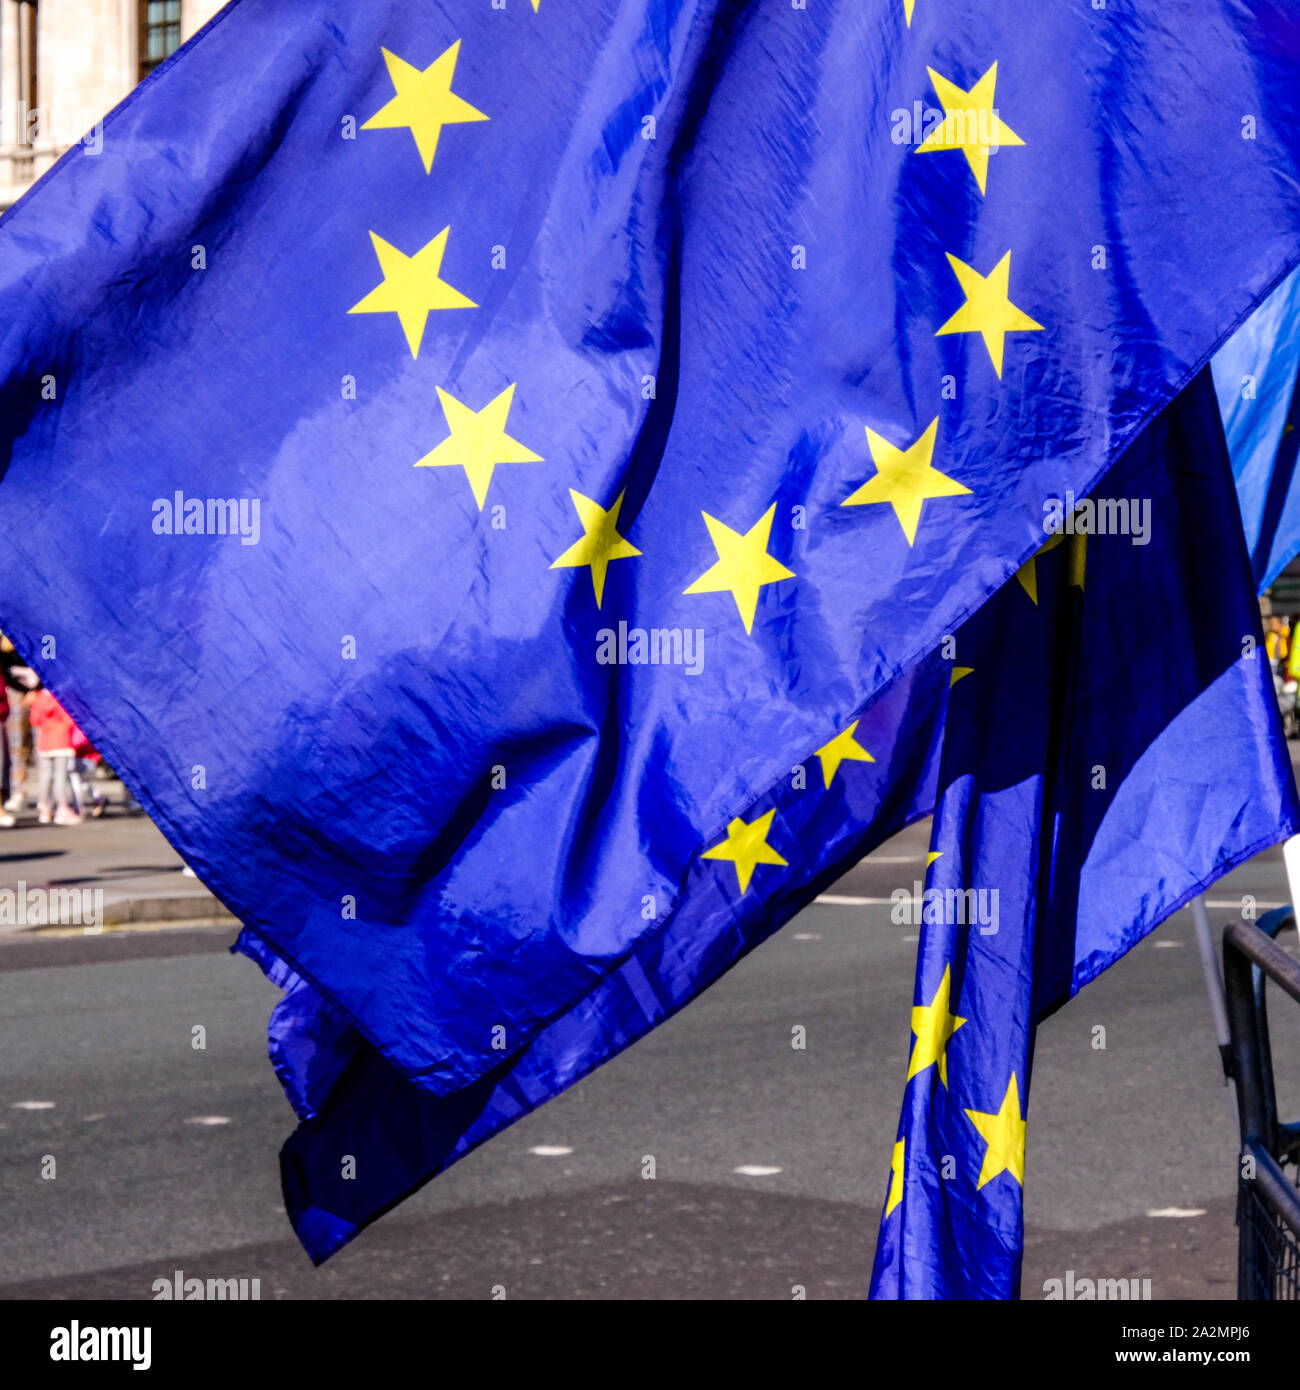 London, October 2nd, 2019, Public Protests Outside The British Parliament or House of Commons About BREXIT and The UK Leaving the EU on October 31, 20 Stock Photo